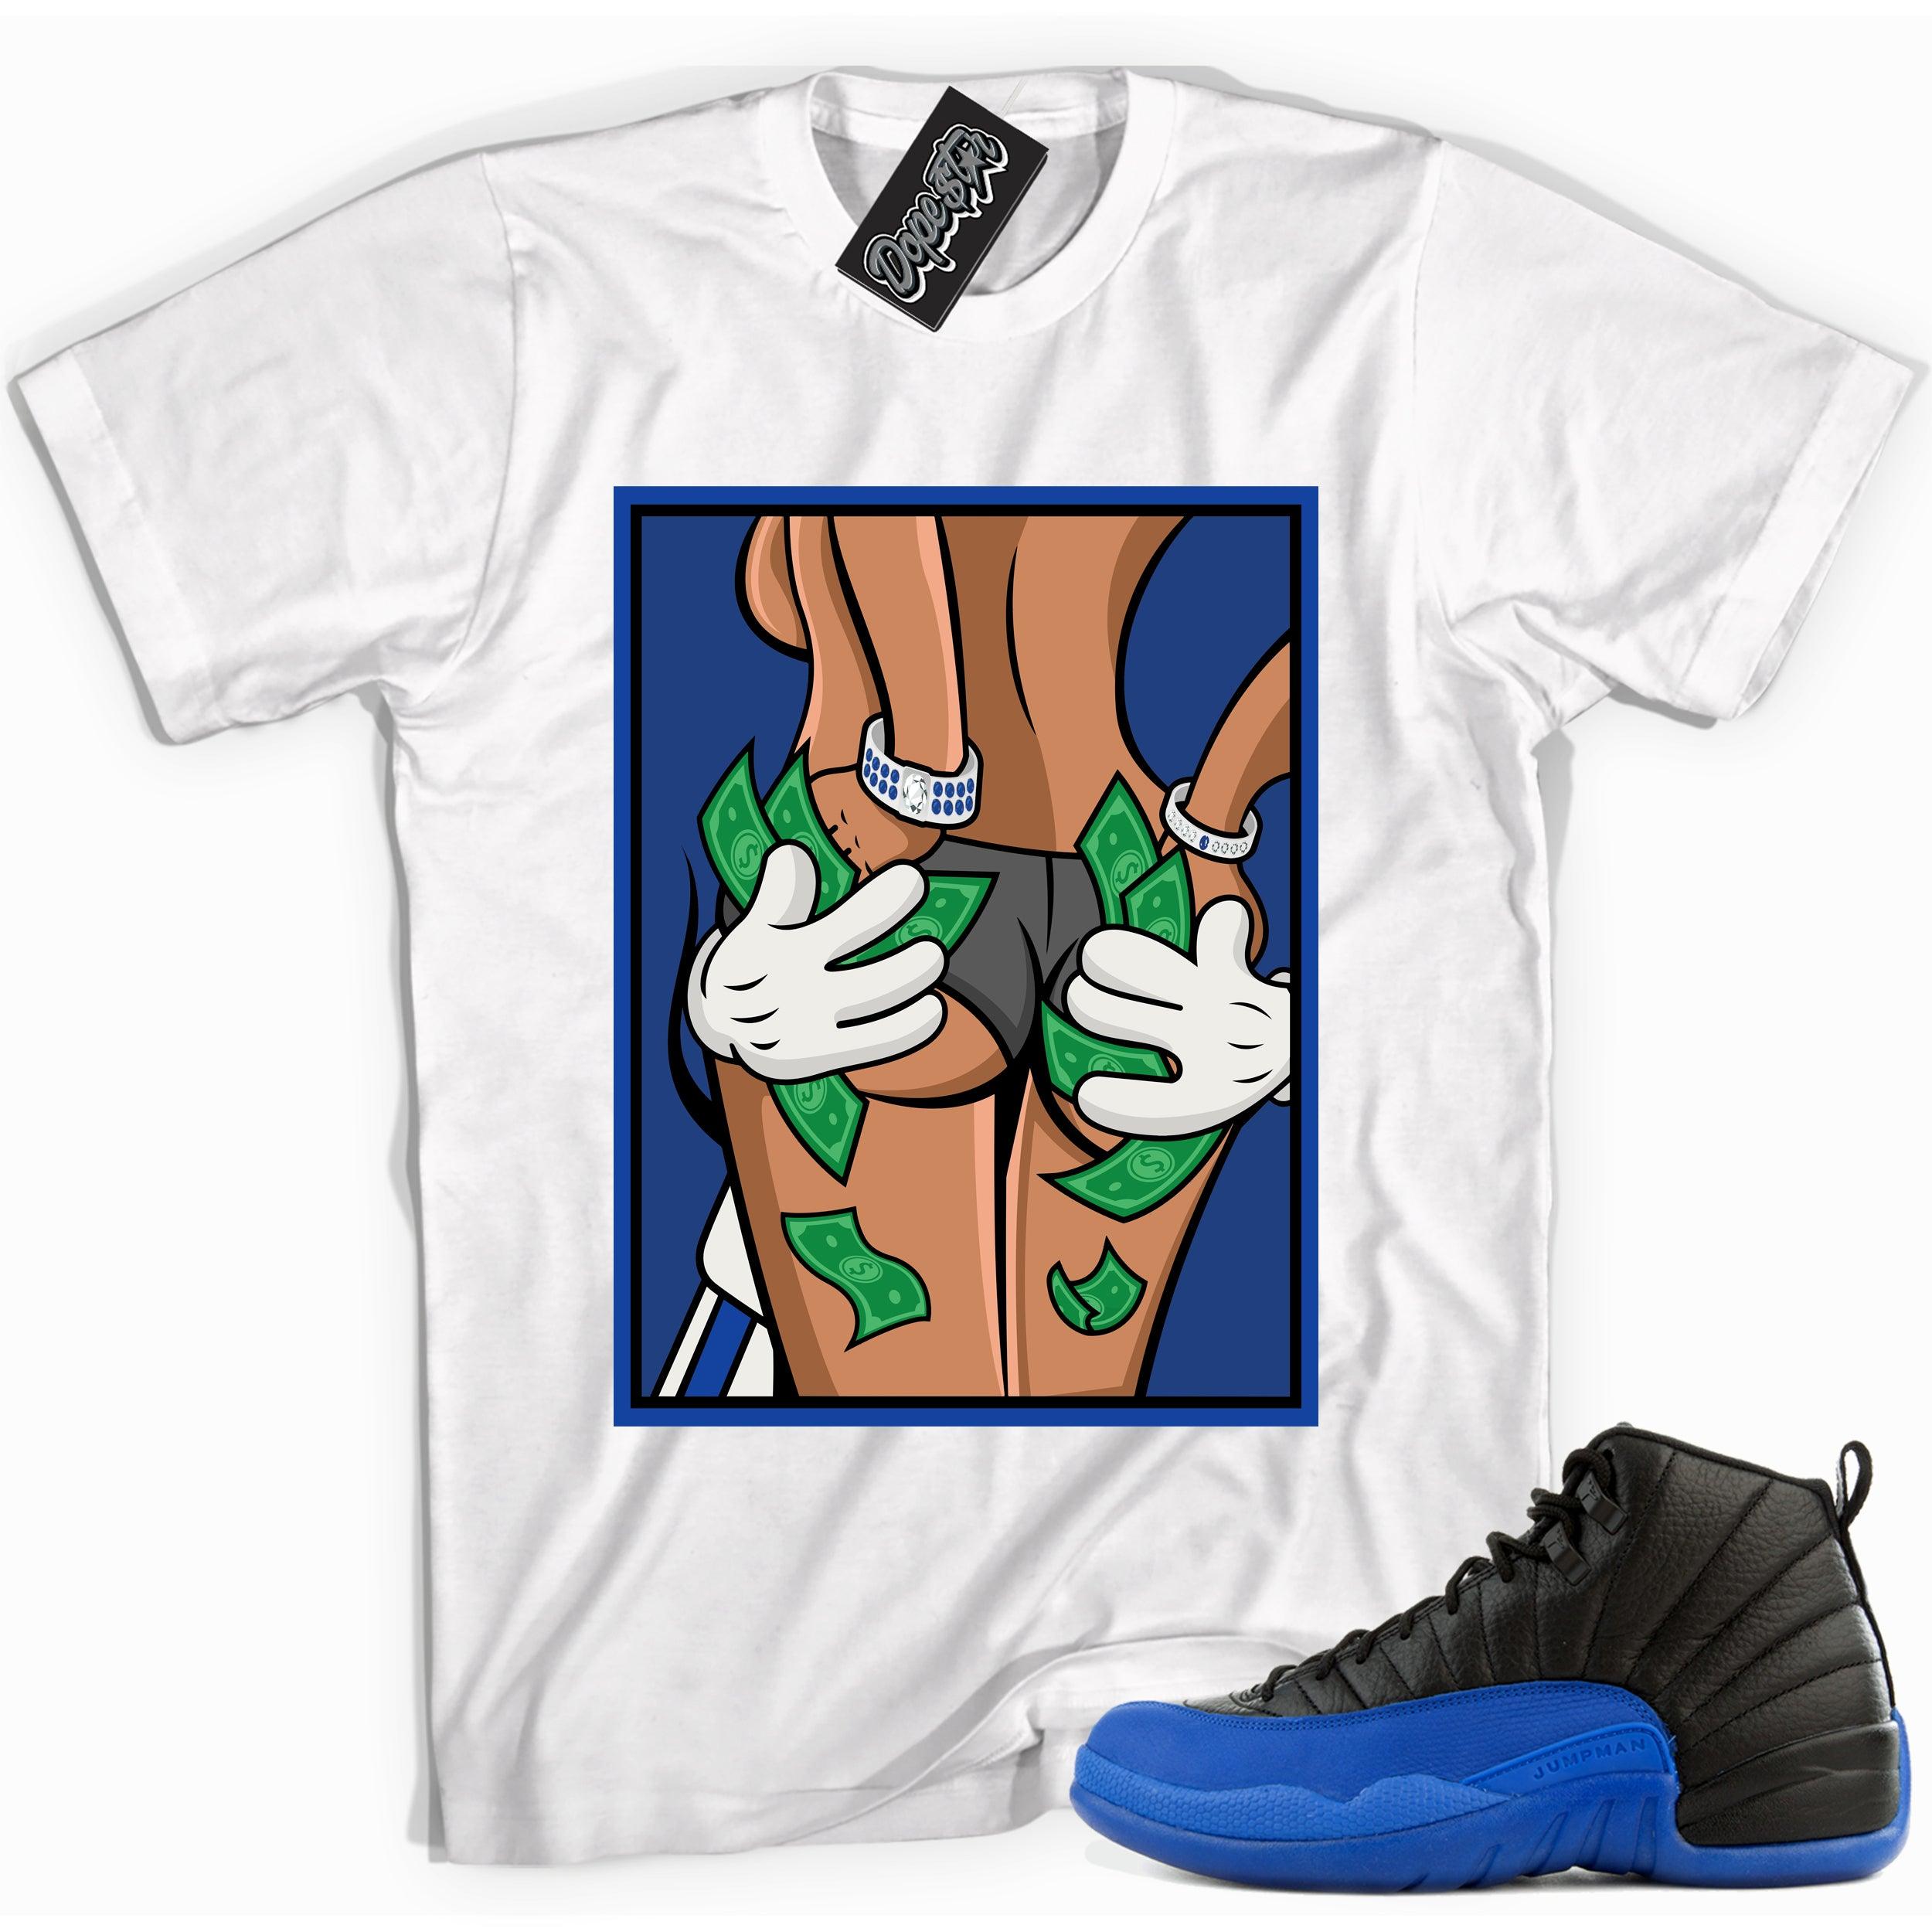 Cool white graphic tee with 'hands full' print, that perfectly matches Air Jordan 12 Retro Black Game Royal sneakers.